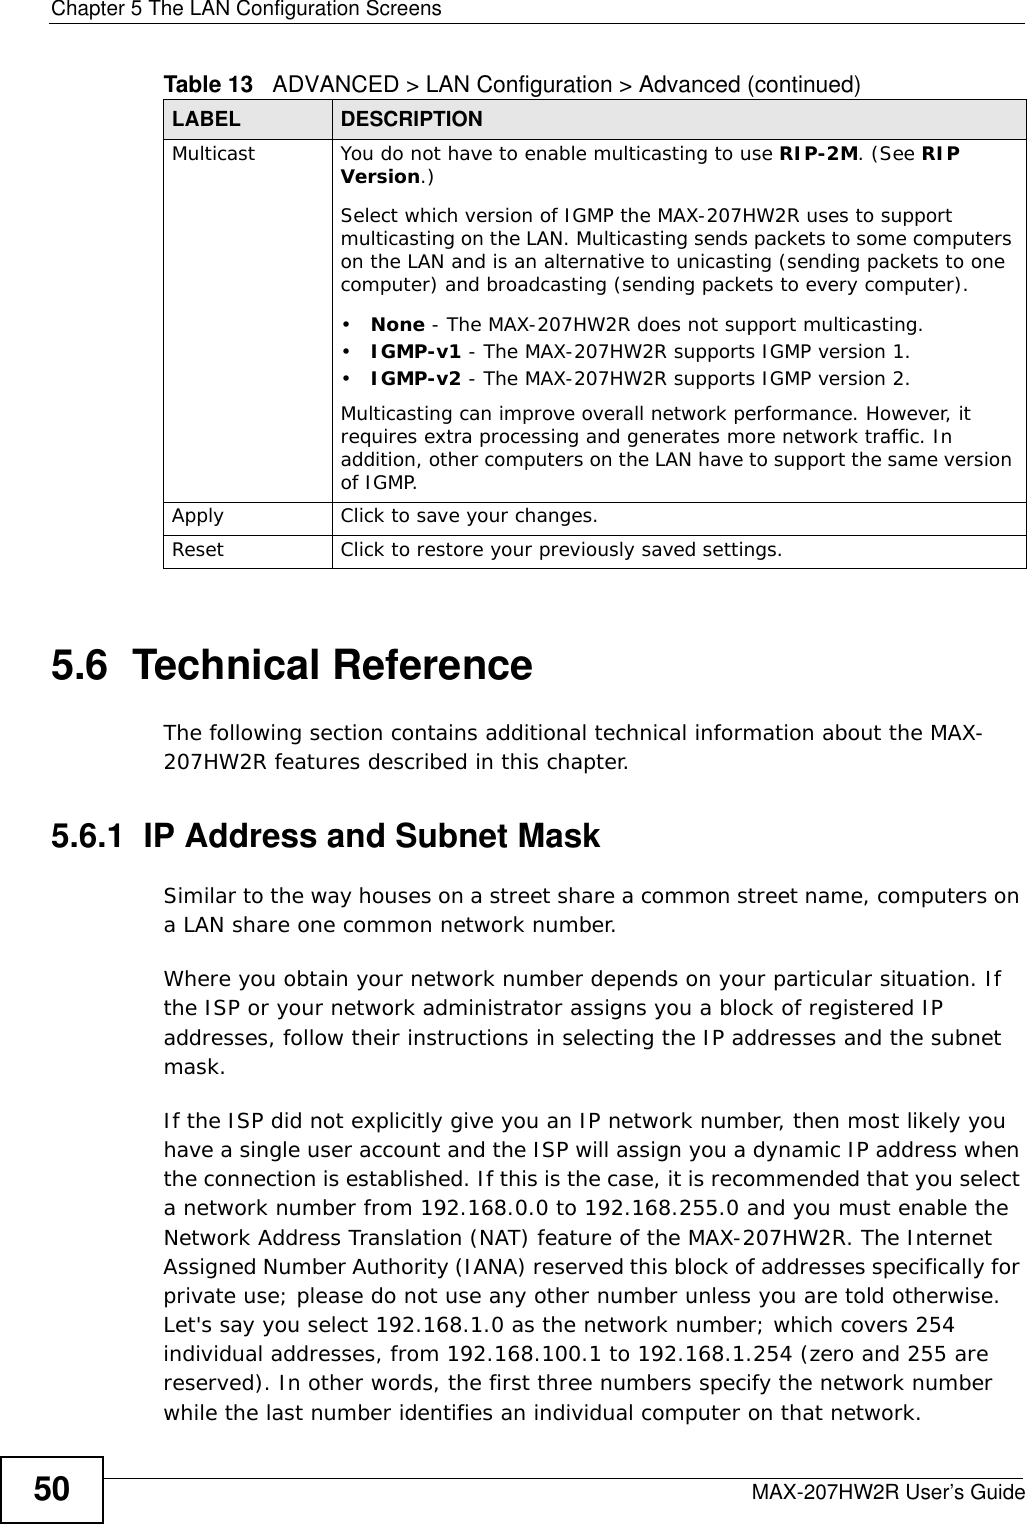 Chapter 5 The LAN Configuration ScreensMAX-207HW2R User’s Guide505.6  Technical ReferenceThe following section contains additional technical information about the MAX-207HW2R features described in this chapter.5.6.1  IP Address and Subnet MaskSimilar to the way houses on a street share a common street name, computers on a LAN share one common network number.Where you obtain your network number depends on your particular situation. If the ISP or your network administrator assigns you a block of registered IP addresses, follow their instructions in selecting the IP addresses and the subnet mask.If the ISP did not explicitly give you an IP network number, then most likely you have a single user account and the ISP will assign you a dynamic IP address when the connection is established. If this is the case, it is recommended that you select a network number from 192.168.0.0 to 192.168.255.0 and you must enable the Network Address Translation (NAT) feature of the MAX-207HW2R. The Internet Assigned Number Authority (IANA) reserved this block of addresses specifically for private use; please do not use any other number unless you are told otherwise. Let&apos;s say you select 192.168.1.0 as the network number; which covers 254 individual addresses, from 192.168.100.1 to 192.168.1.254 (zero and 255 are reserved). In other words, the first three numbers specify the network number while the last number identifies an individual computer on that network.Multicast You do not have to enable multicasting to use RIP-2M. (See RIP Version.)Select which version of IGMP the MAX-207HW2R uses to support multicasting on the LAN. Multicasting sends packets to some computers on the LAN and is an alternative to unicasting (sending packets to one computer) and broadcasting (sending packets to every computer).•None - The MAX-207HW2R does not support multicasting.•IGMP-v1 - The MAX-207HW2R supports IGMP version 1.•IGMP-v2 - The MAX-207HW2R supports IGMP version 2.Multicasting can improve overall network performance. However, it requires extra processing and generates more network traffic. In addition, other computers on the LAN have to support the same version of IGMP.Apply Click to save your changes.Reset Click to restore your previously saved settings.Table 13   ADVANCED &gt; LAN Configuration &gt; Advanced (continued)LABEL DESCRIPTION